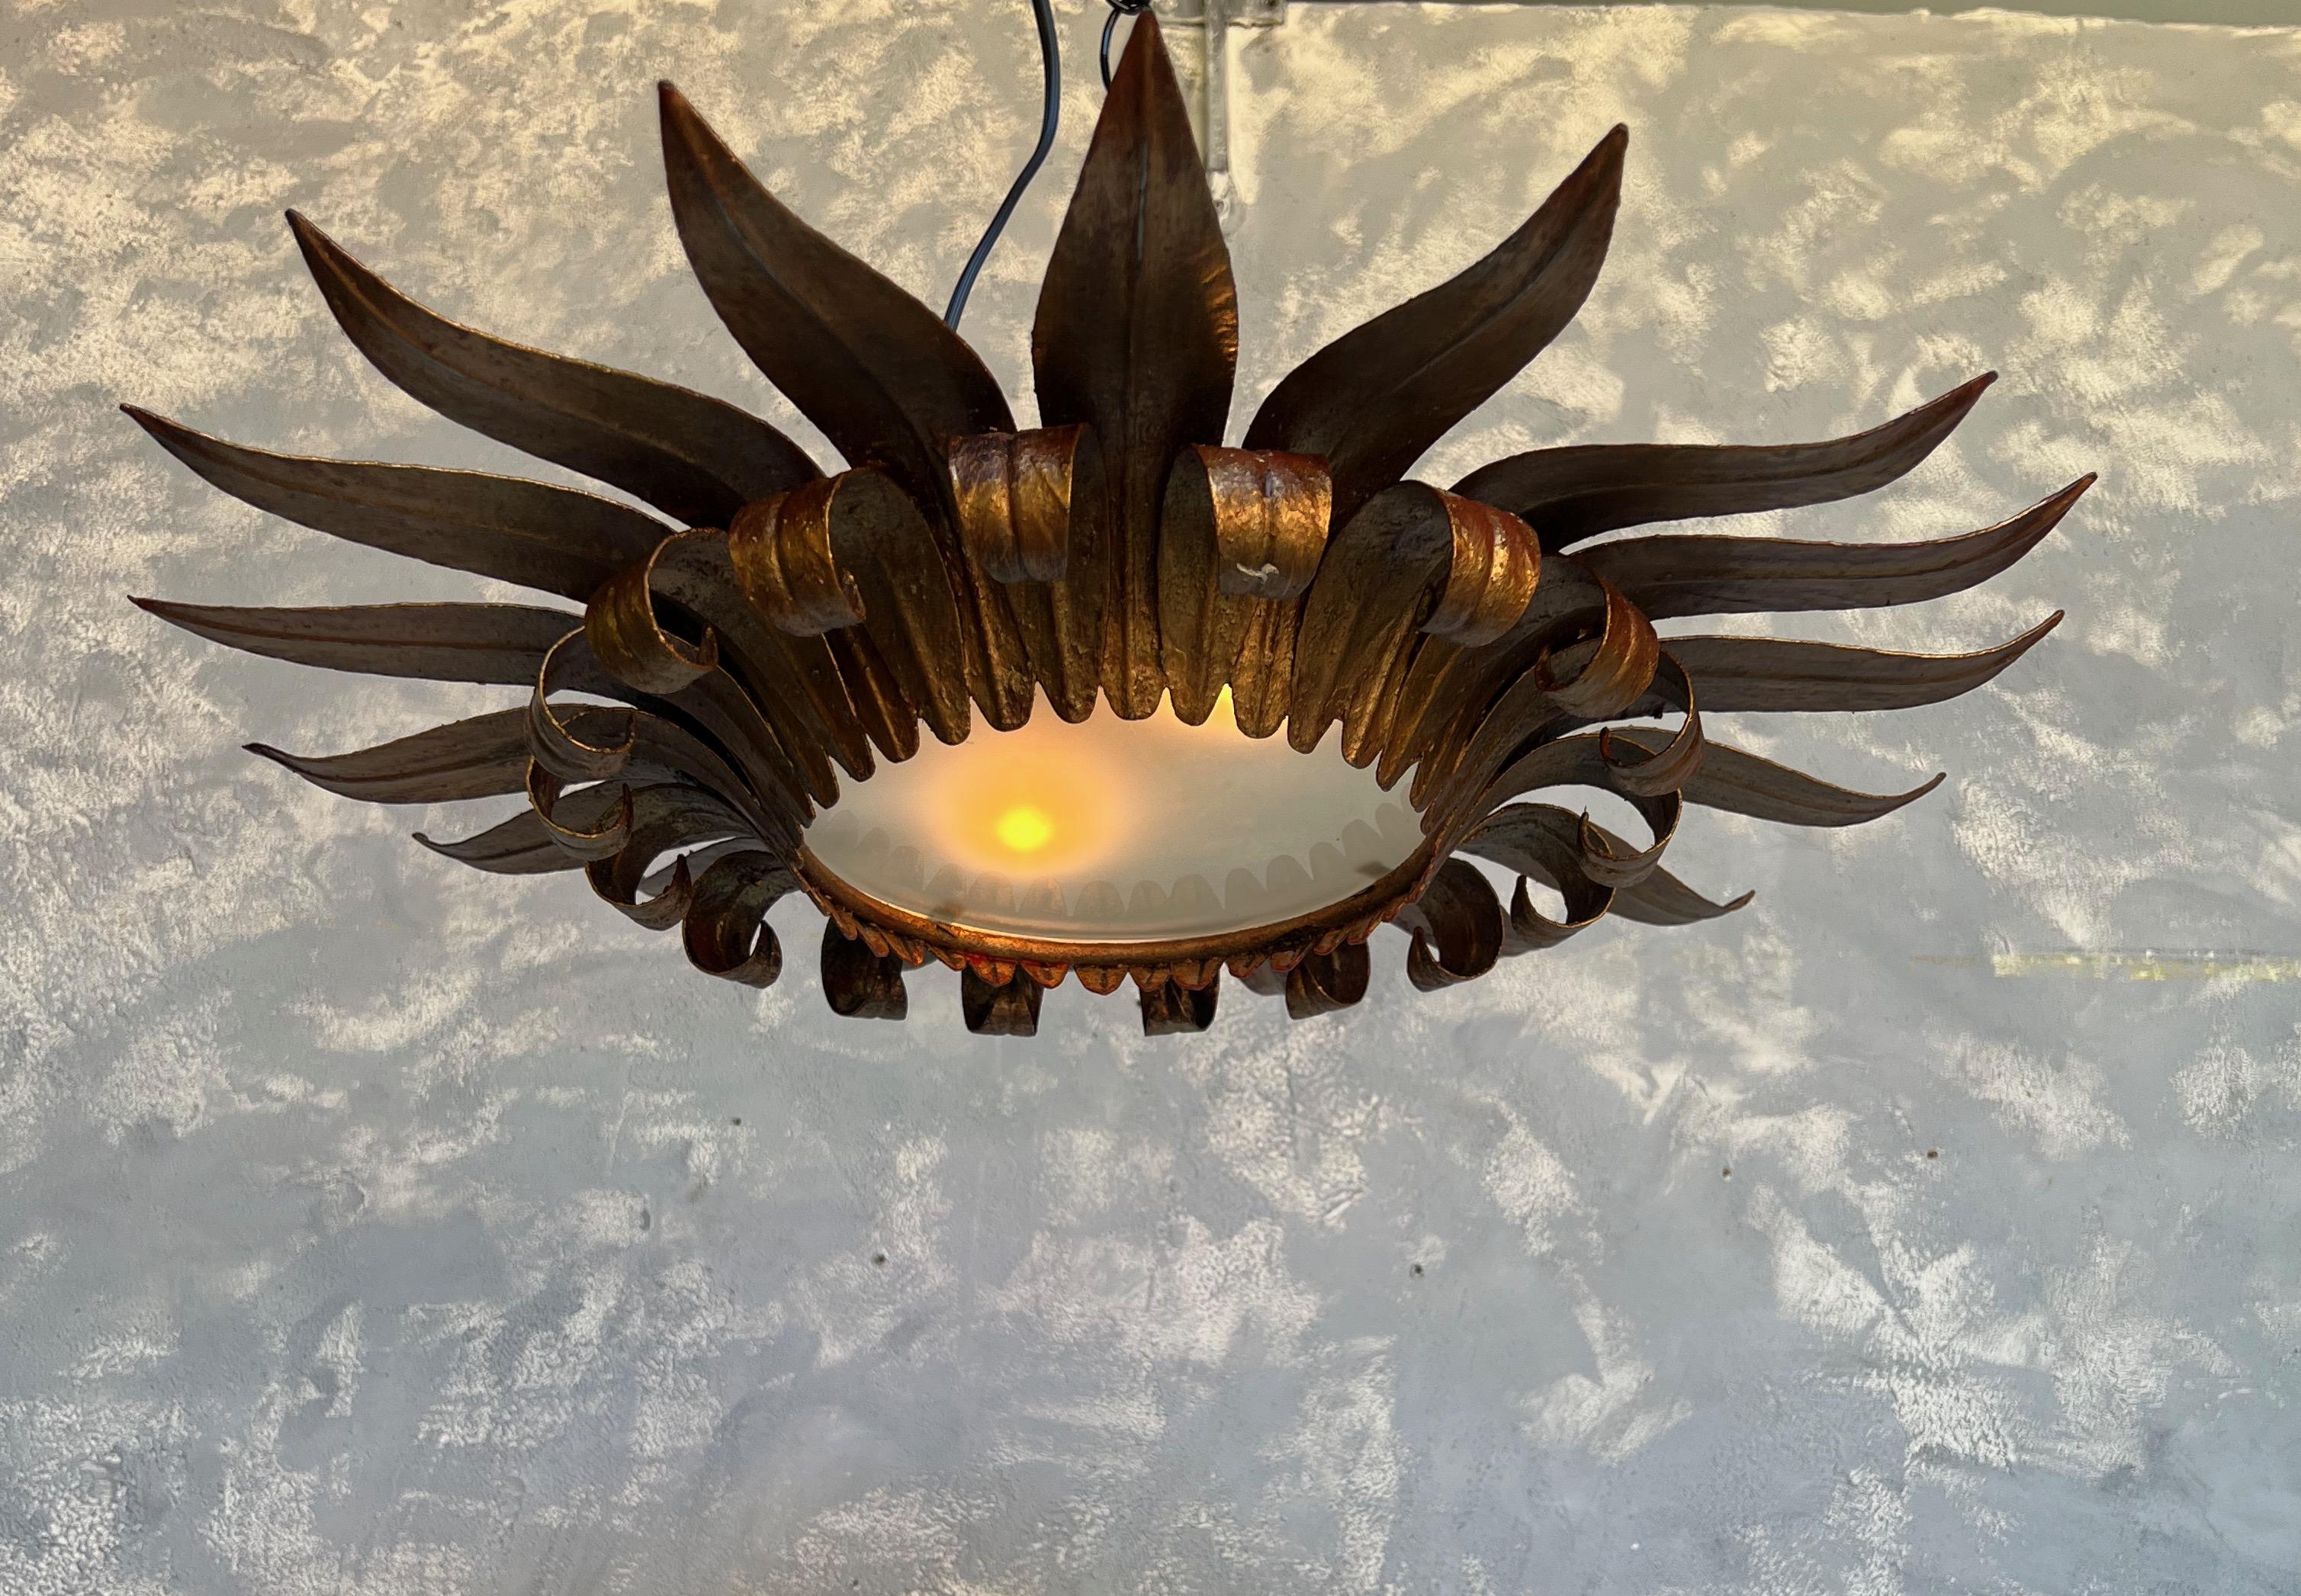 This intriguing Spanish flush mount ceiling fixture is a remarkable piece of craftsmanship with a double tiered leaf design. The upper leaves primarily lie flat, offering a contrast to the lower leaves which curve gracefully at the top and extend